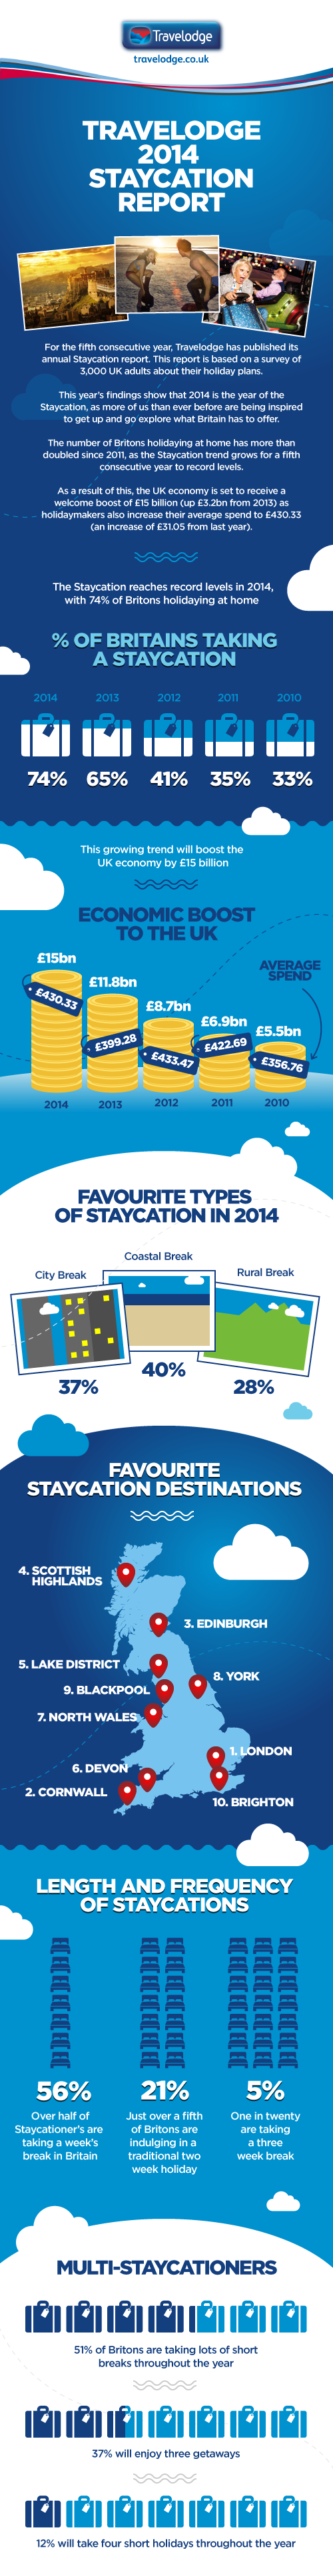 staycations travelodge infographic